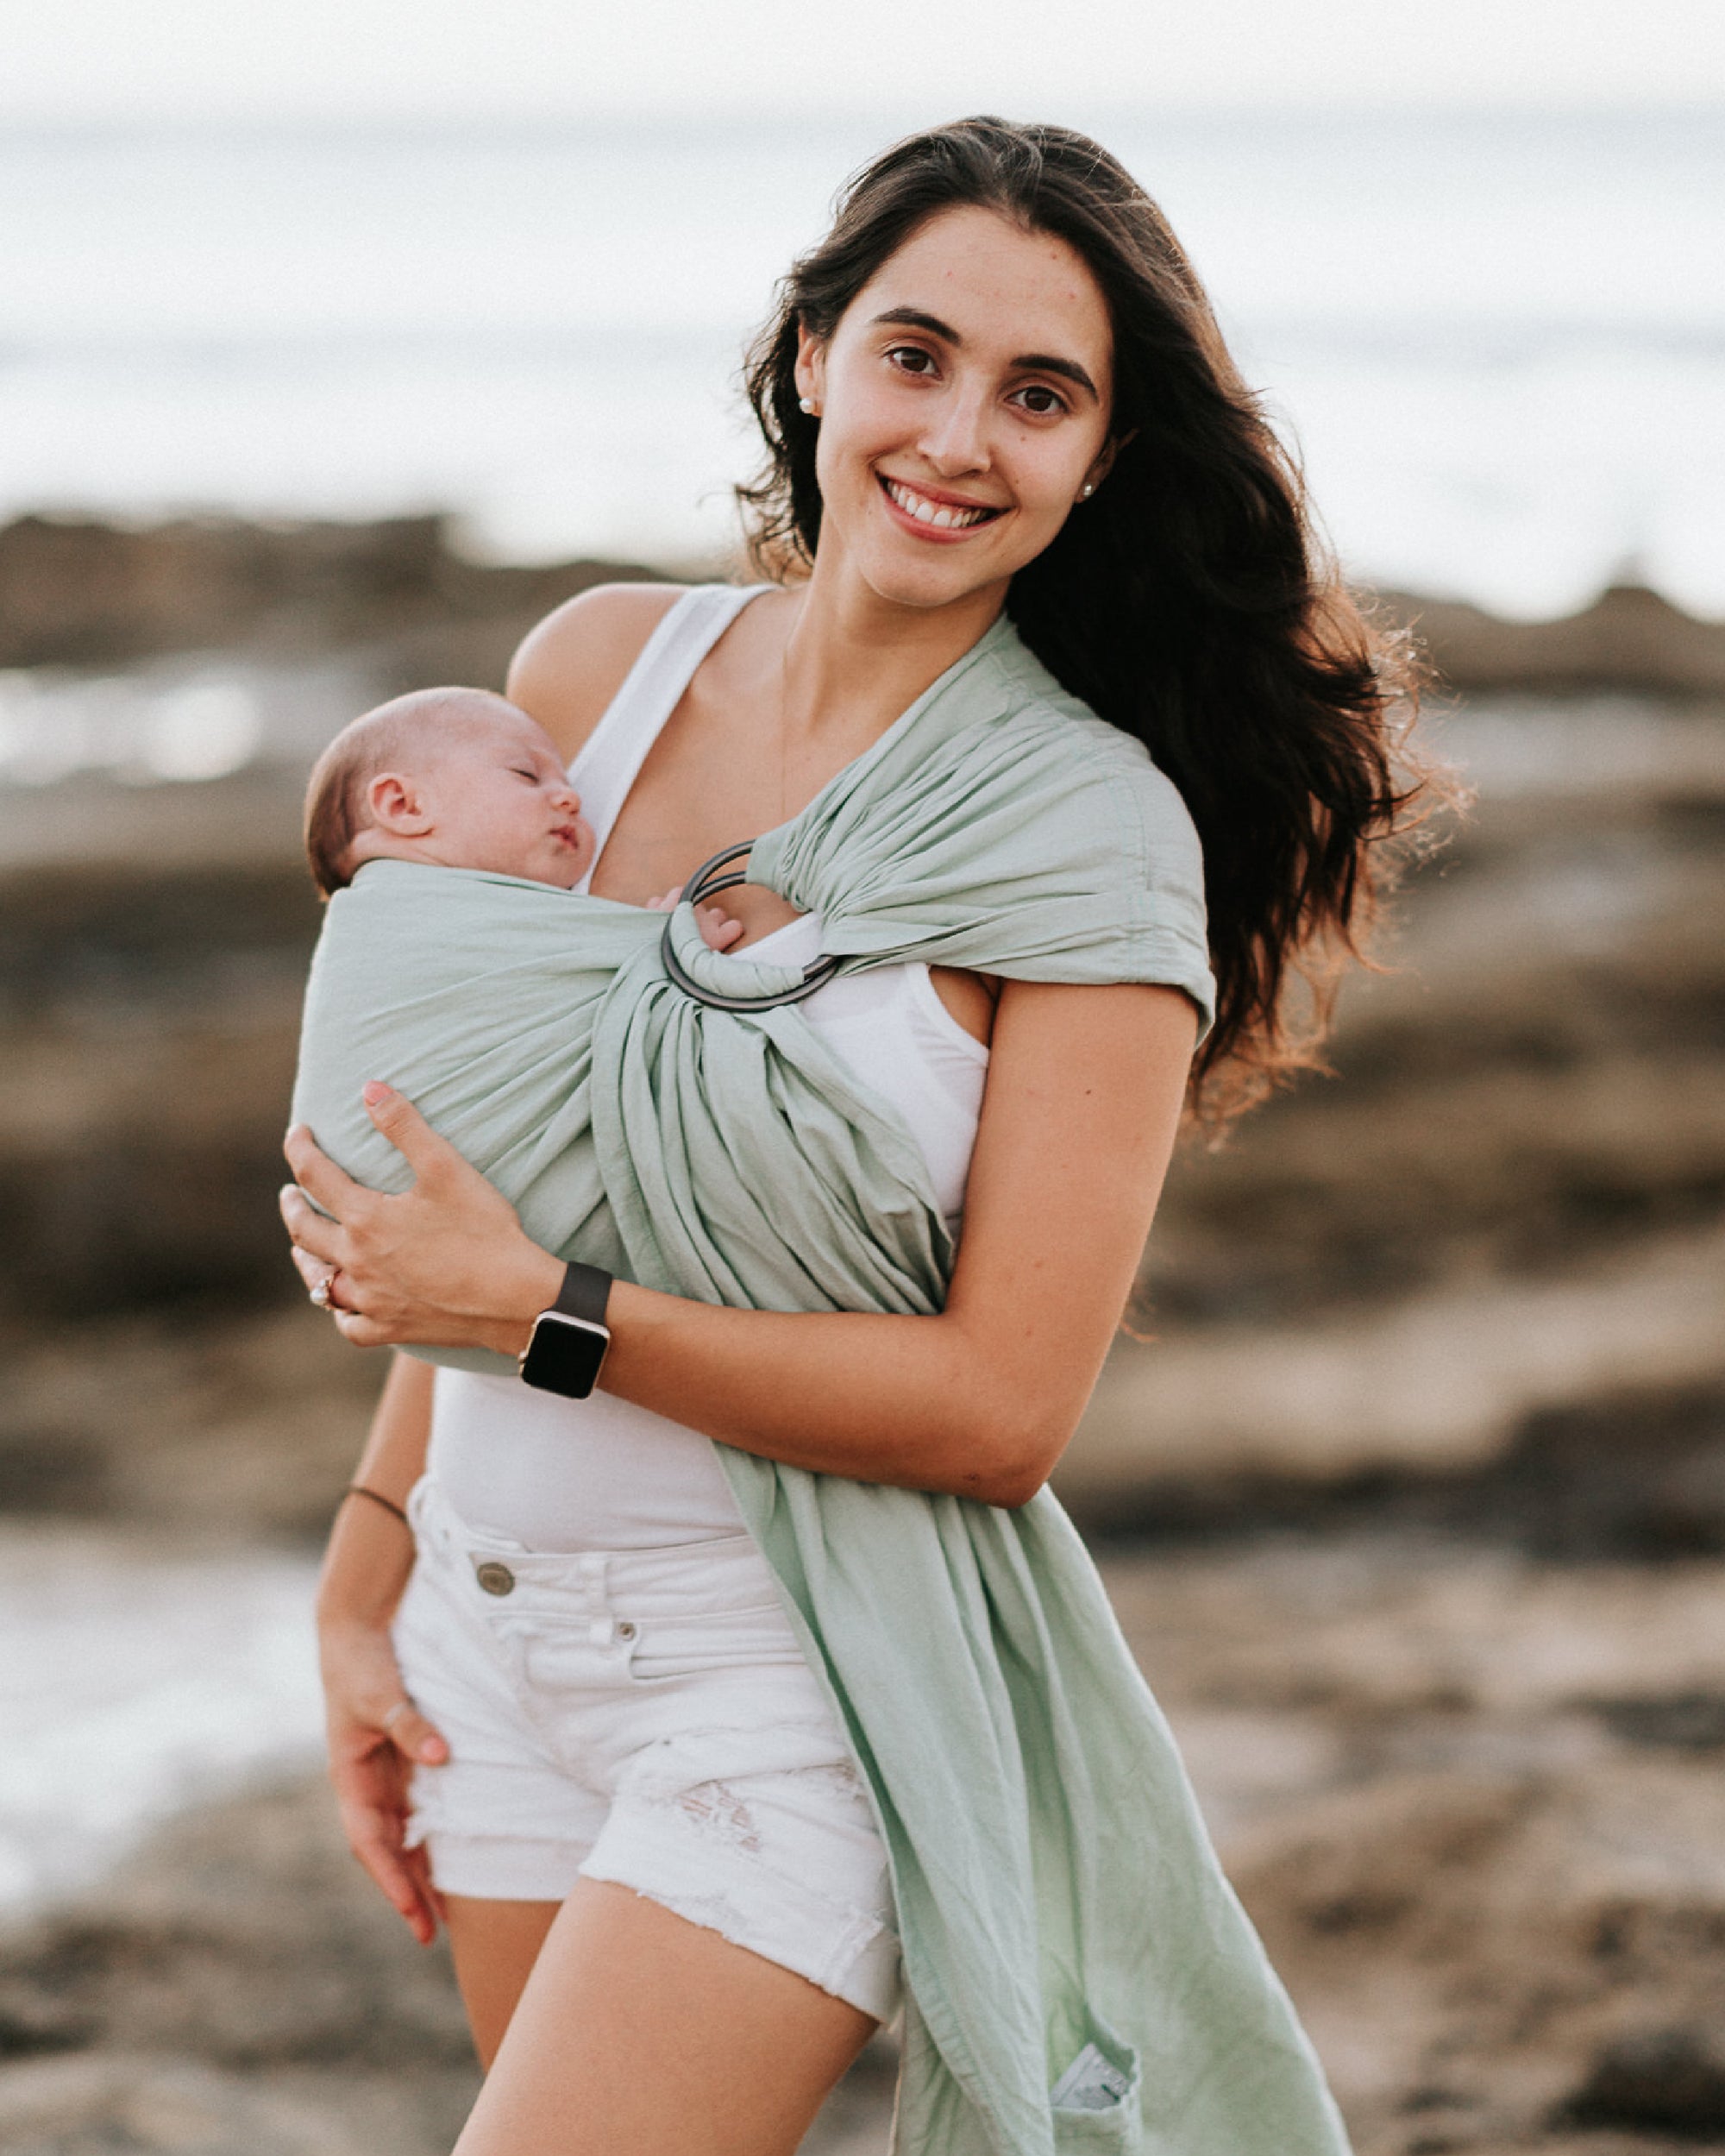 From Newborn to Toddler: Adapting Your Babywearing Techniques as Your Child Grows